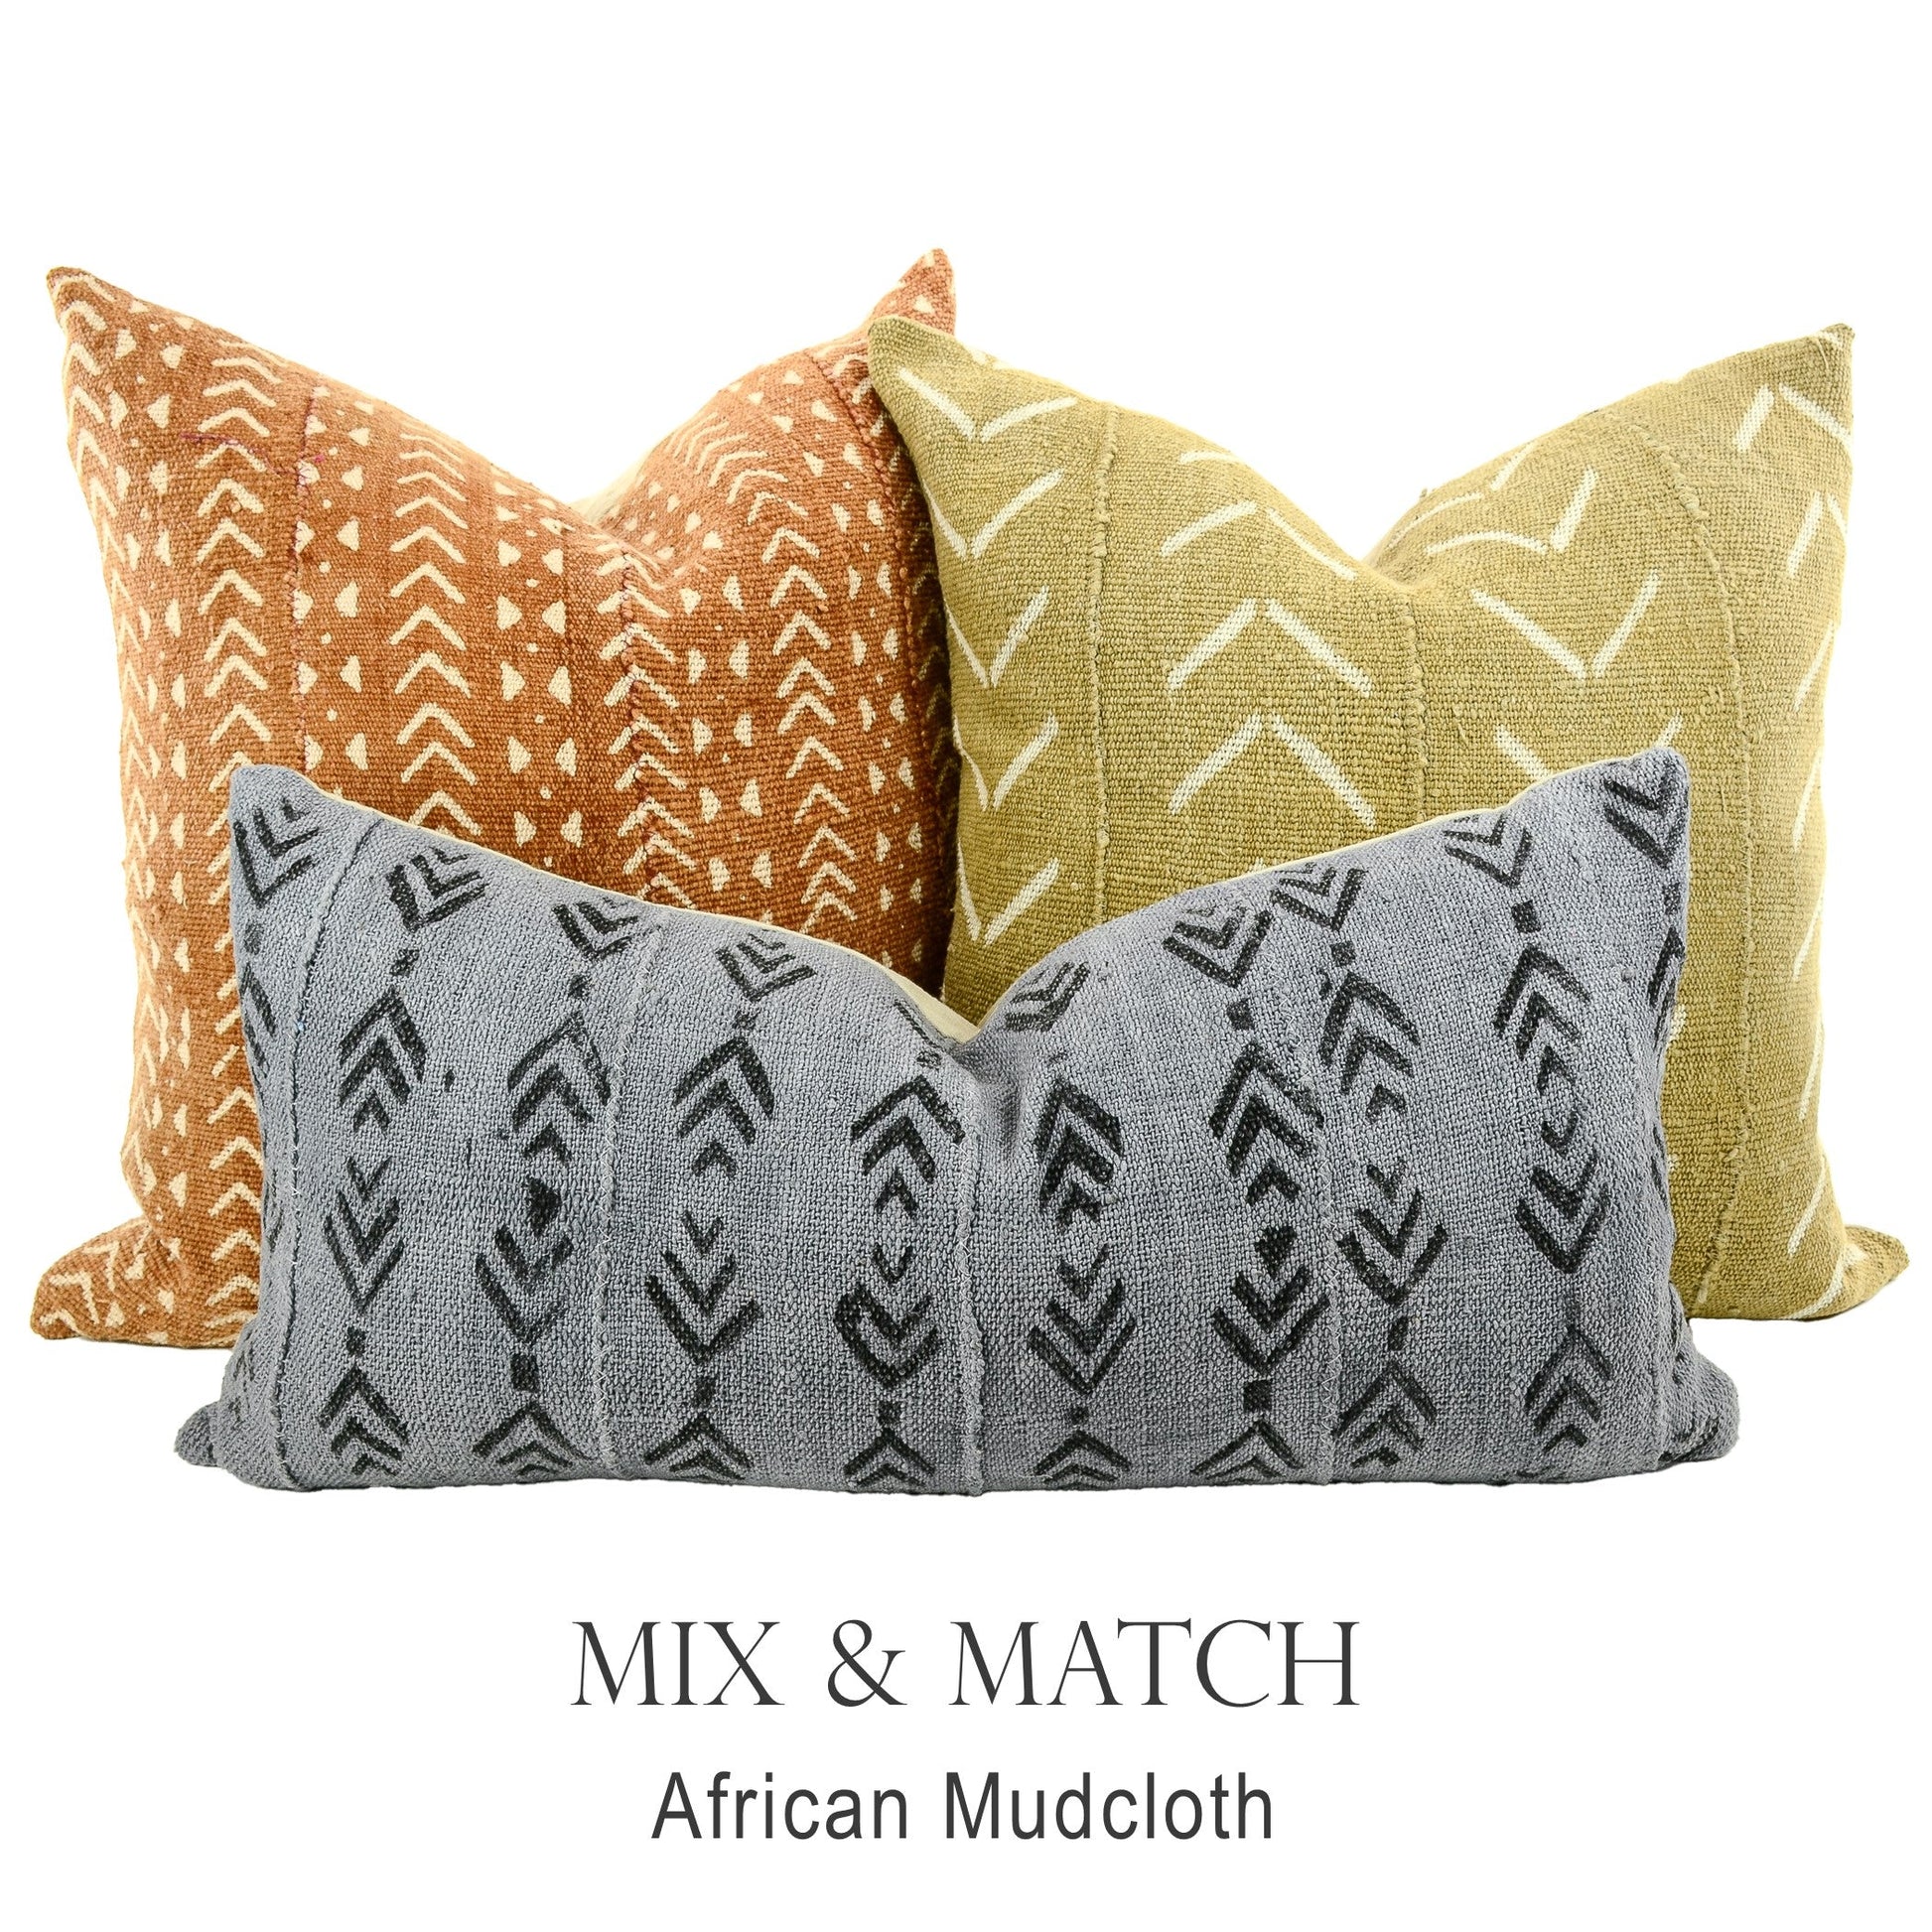 Mix and match pillows from different fabrics and colors